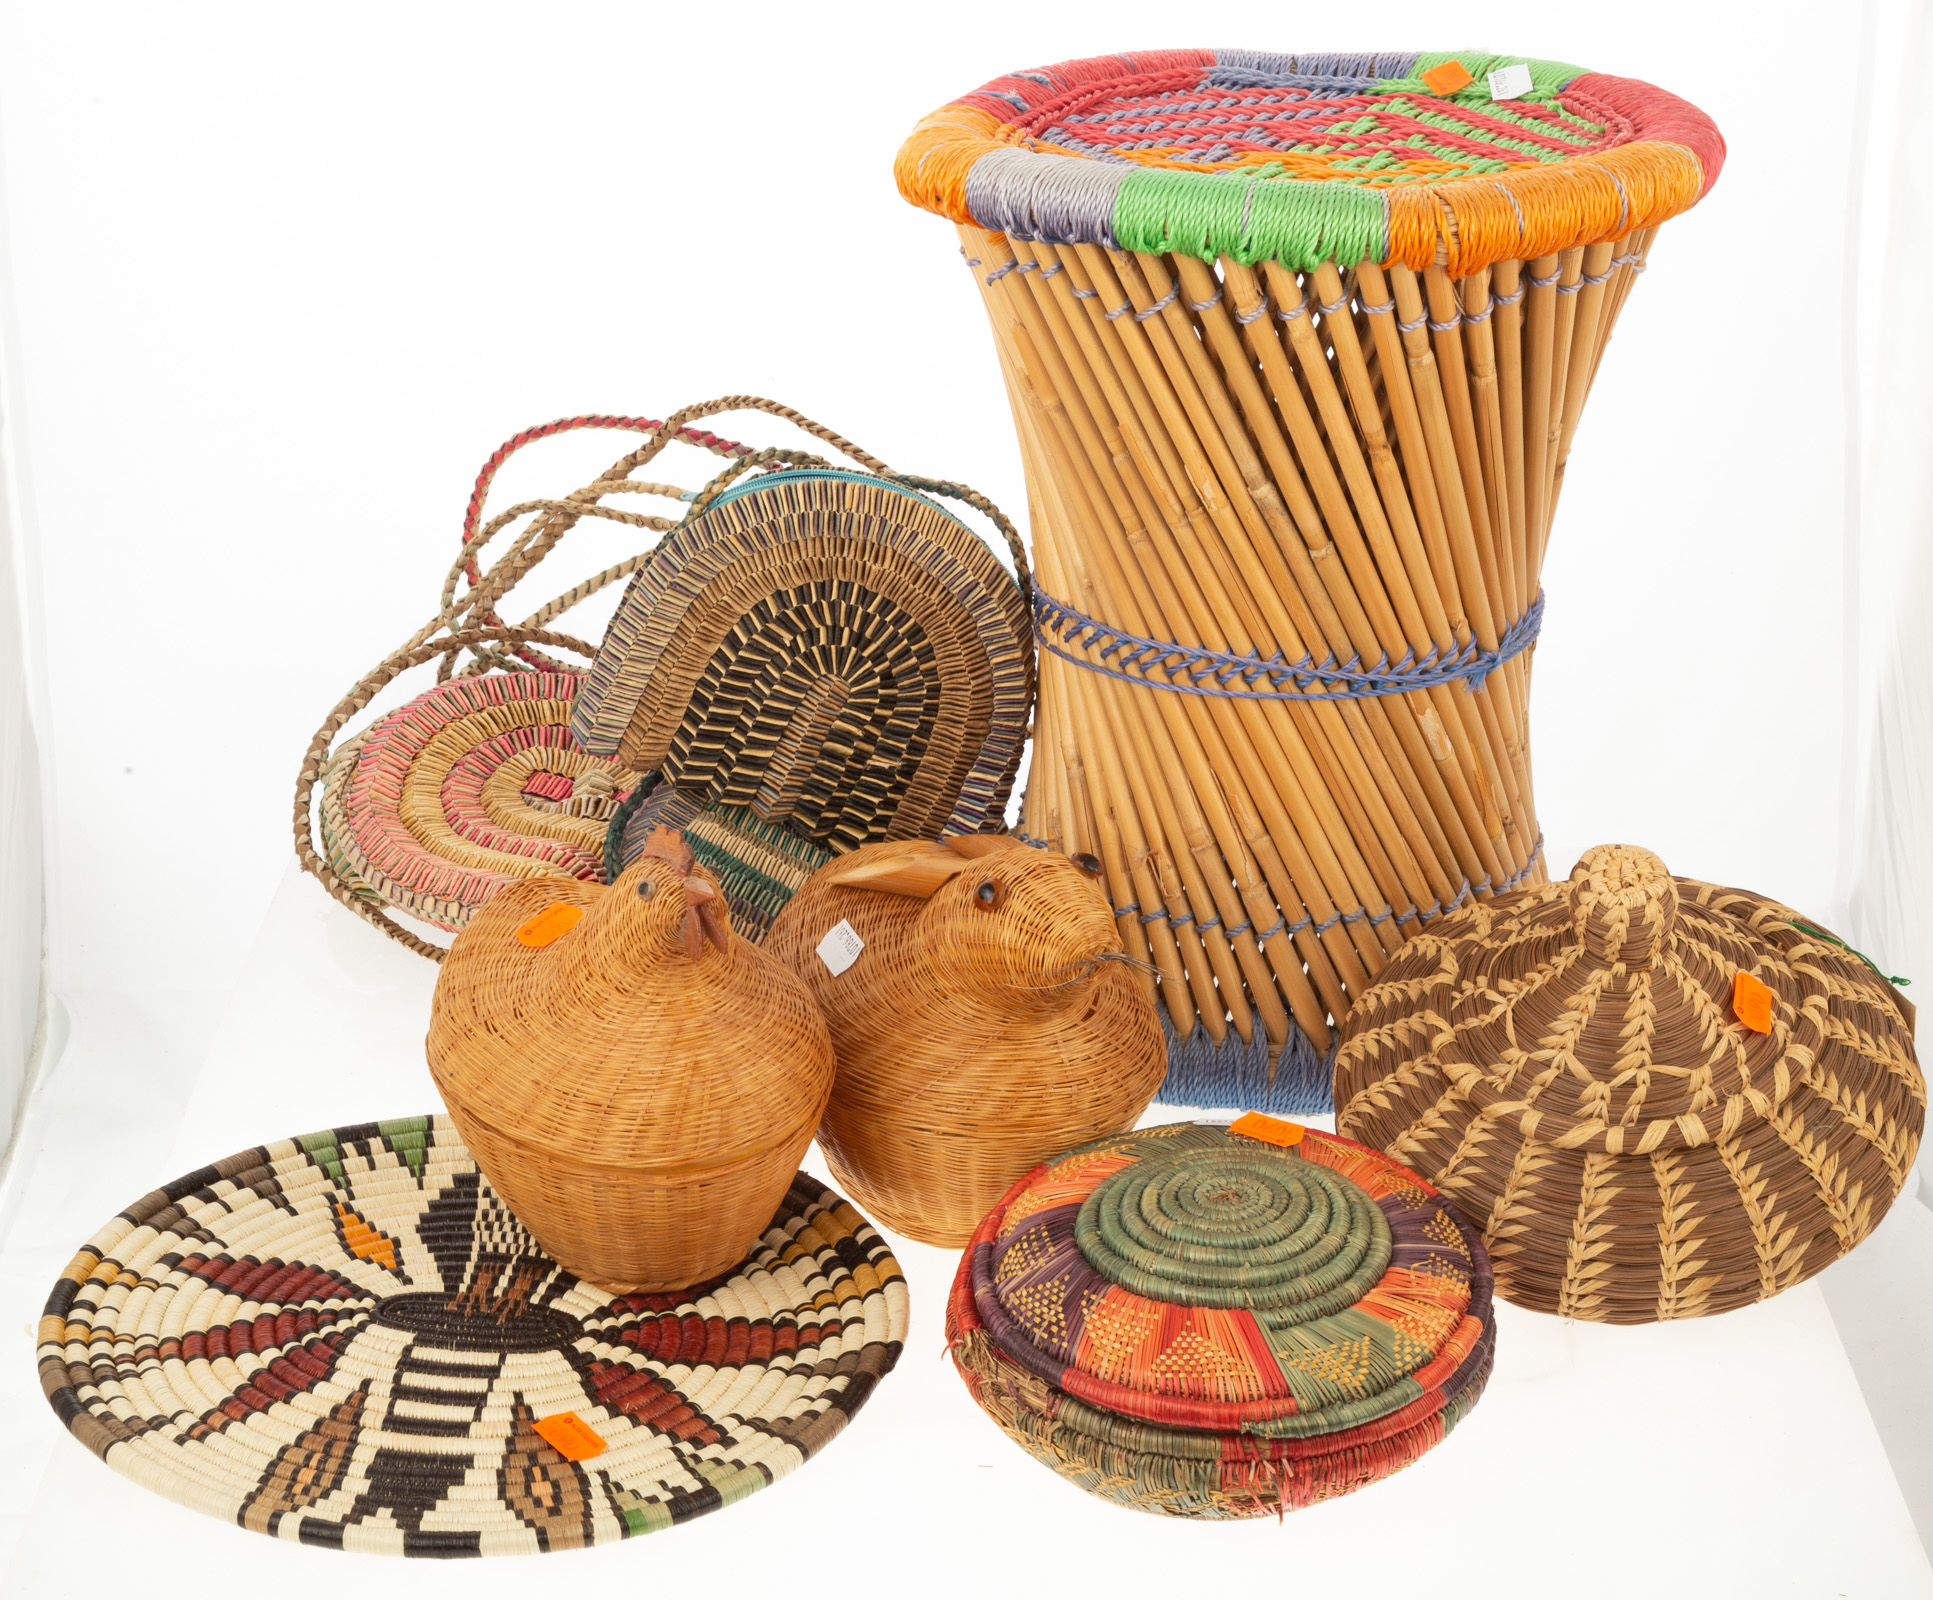 COLLECTIONS OF BASKETS BASKET 2e9524